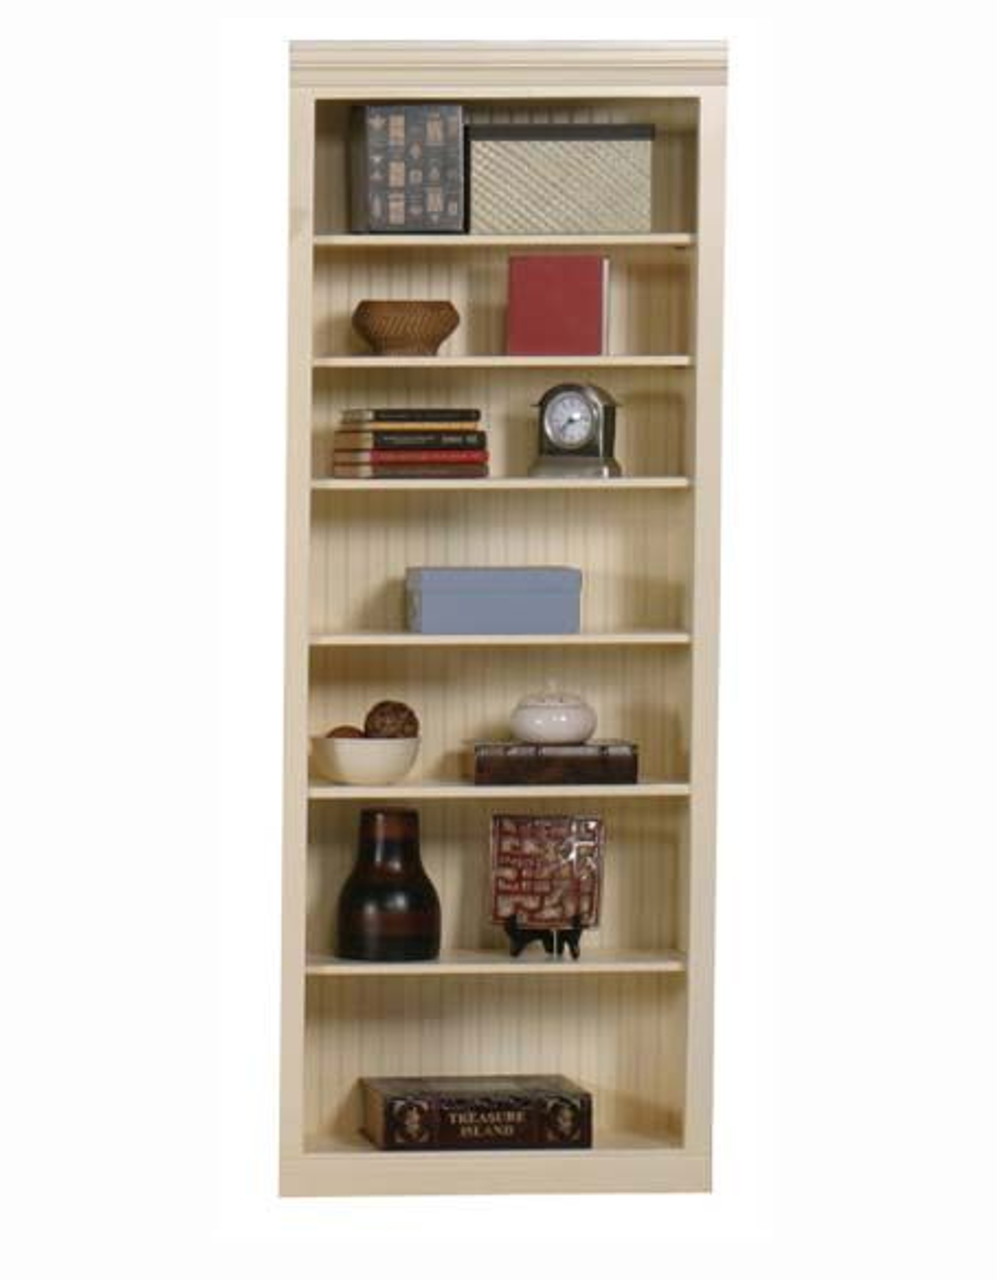 Eagle 32 x 84" Havana Coastal Solid Poplar and Birch Hardwood Painted Furniture Transitional Open Style Wooden Home Office Bookcase with 5 Adjustable Shelves and 1 Fixed Shelf, Shown in Antique White Finish, Part # E-72384